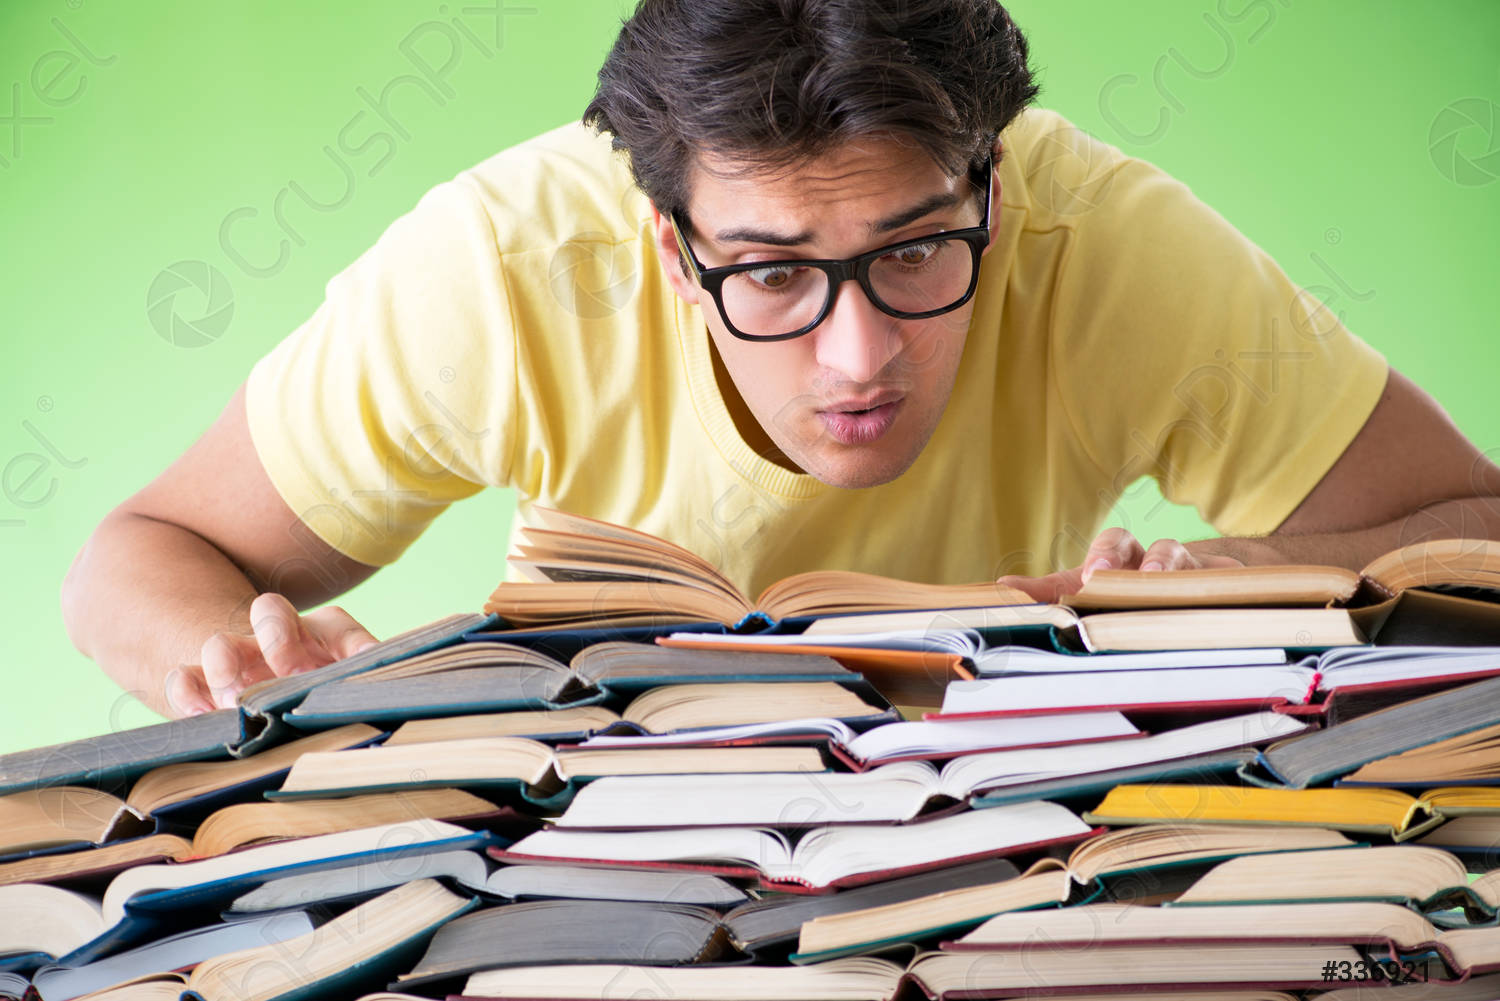 student-with-too-many-books-336921.jpg